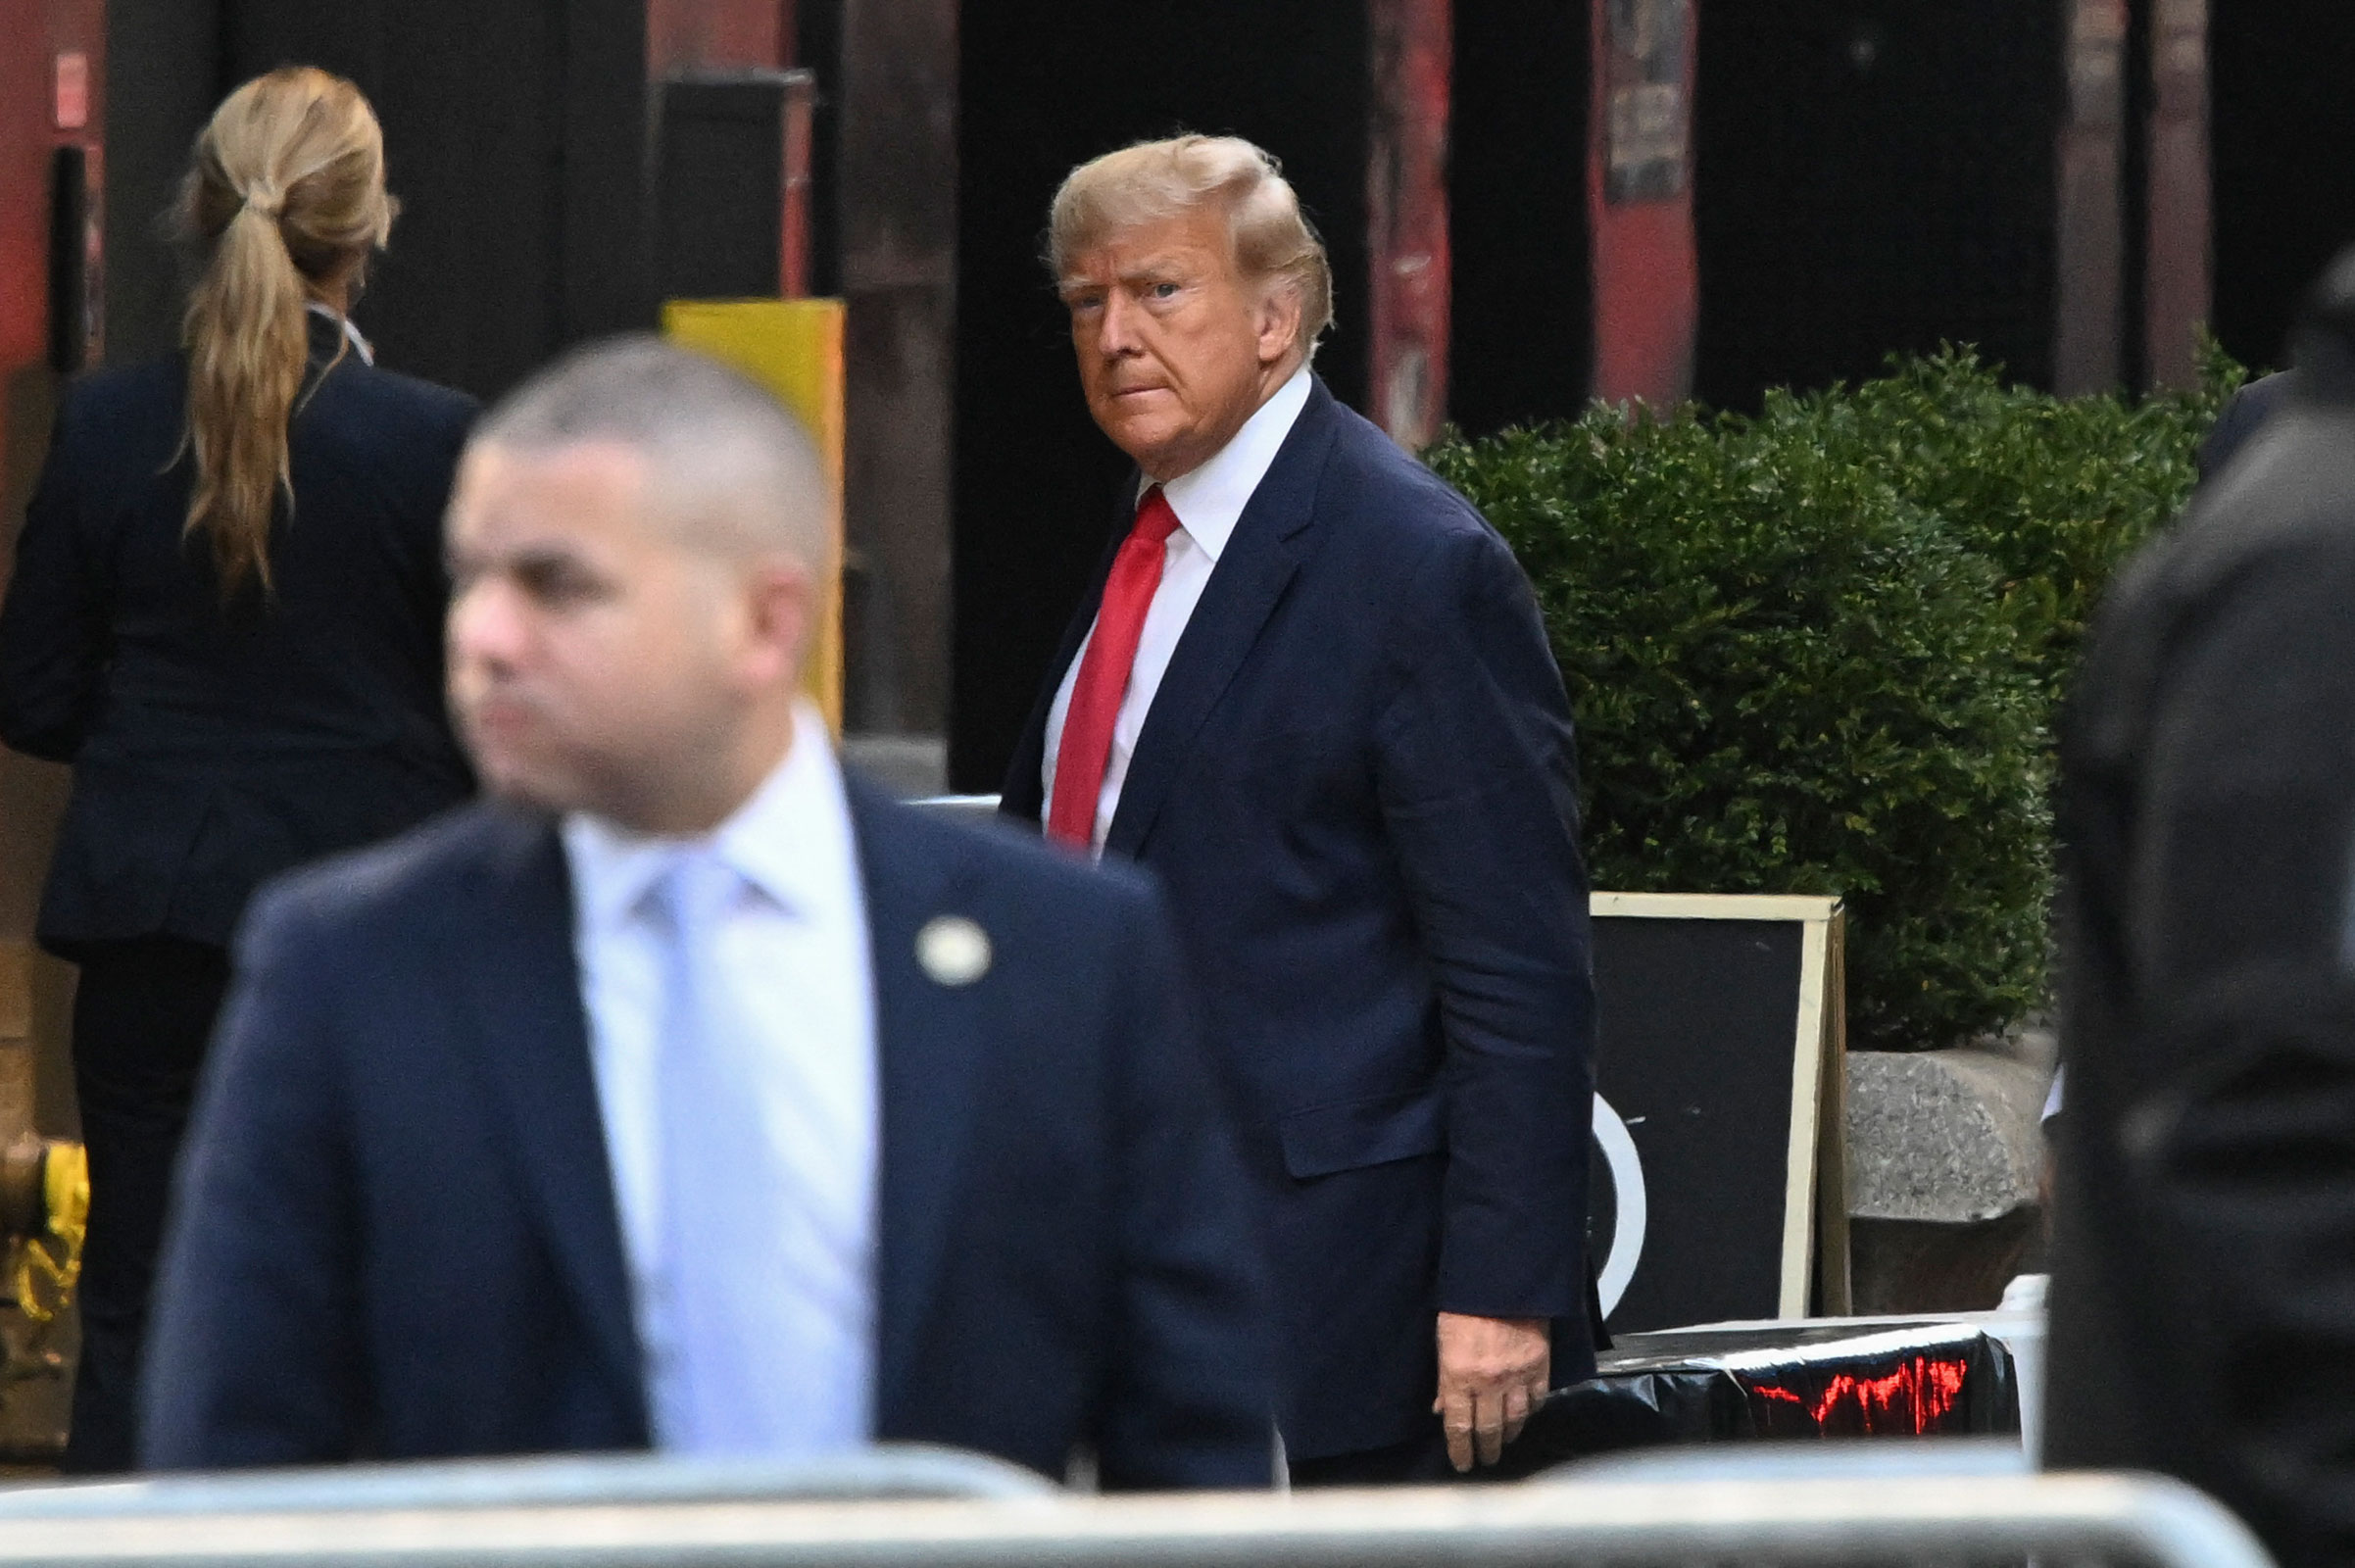 Former President Donald Trump arrives at Trump Tower in New York on April 3.